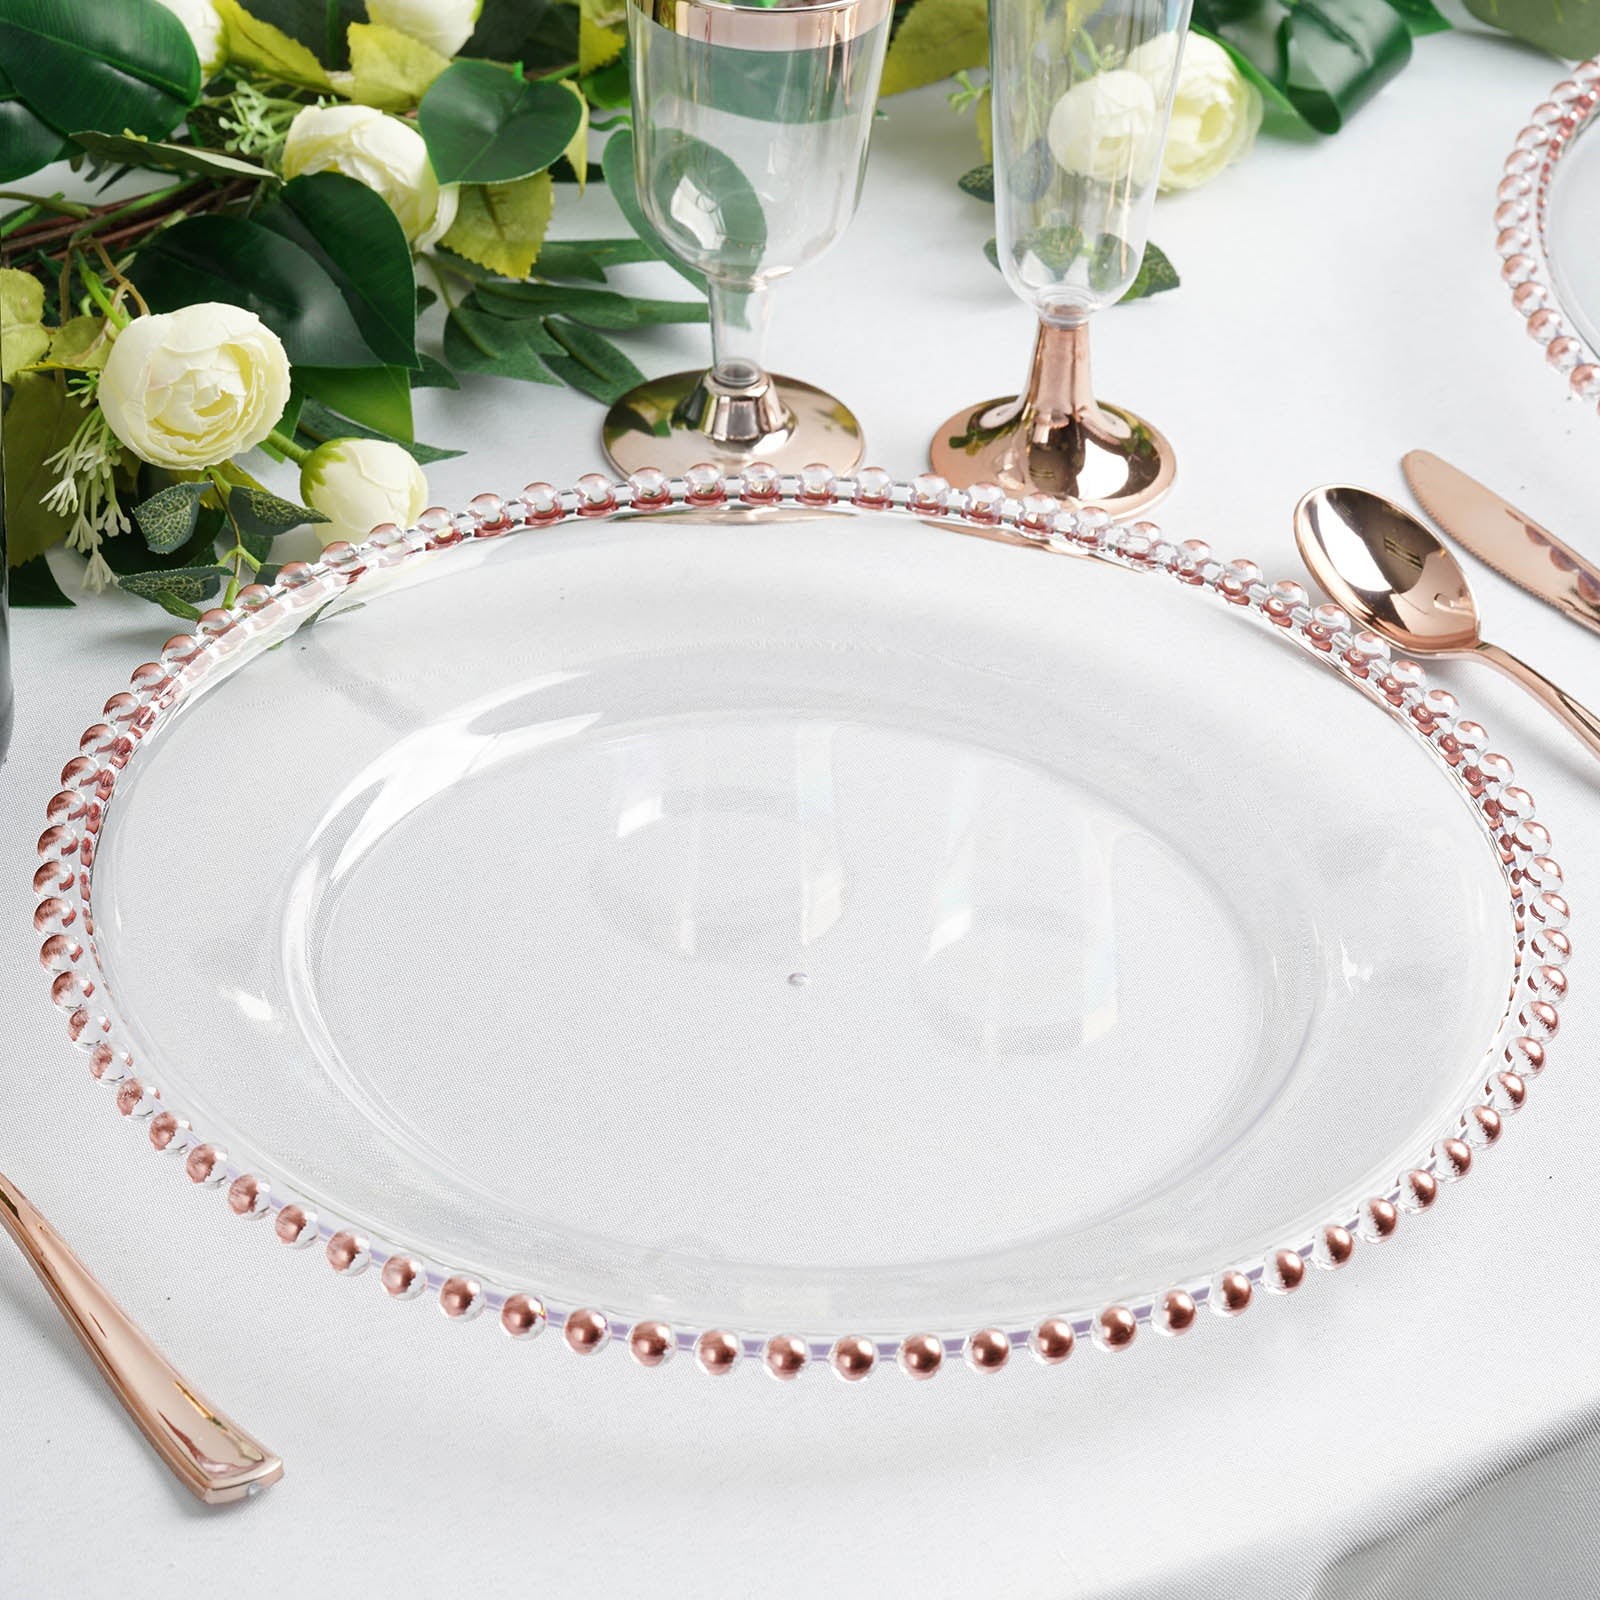 TigerChef Clear Acrylic Plastic Charger Plate With Rose Gold Beaded Rim 12